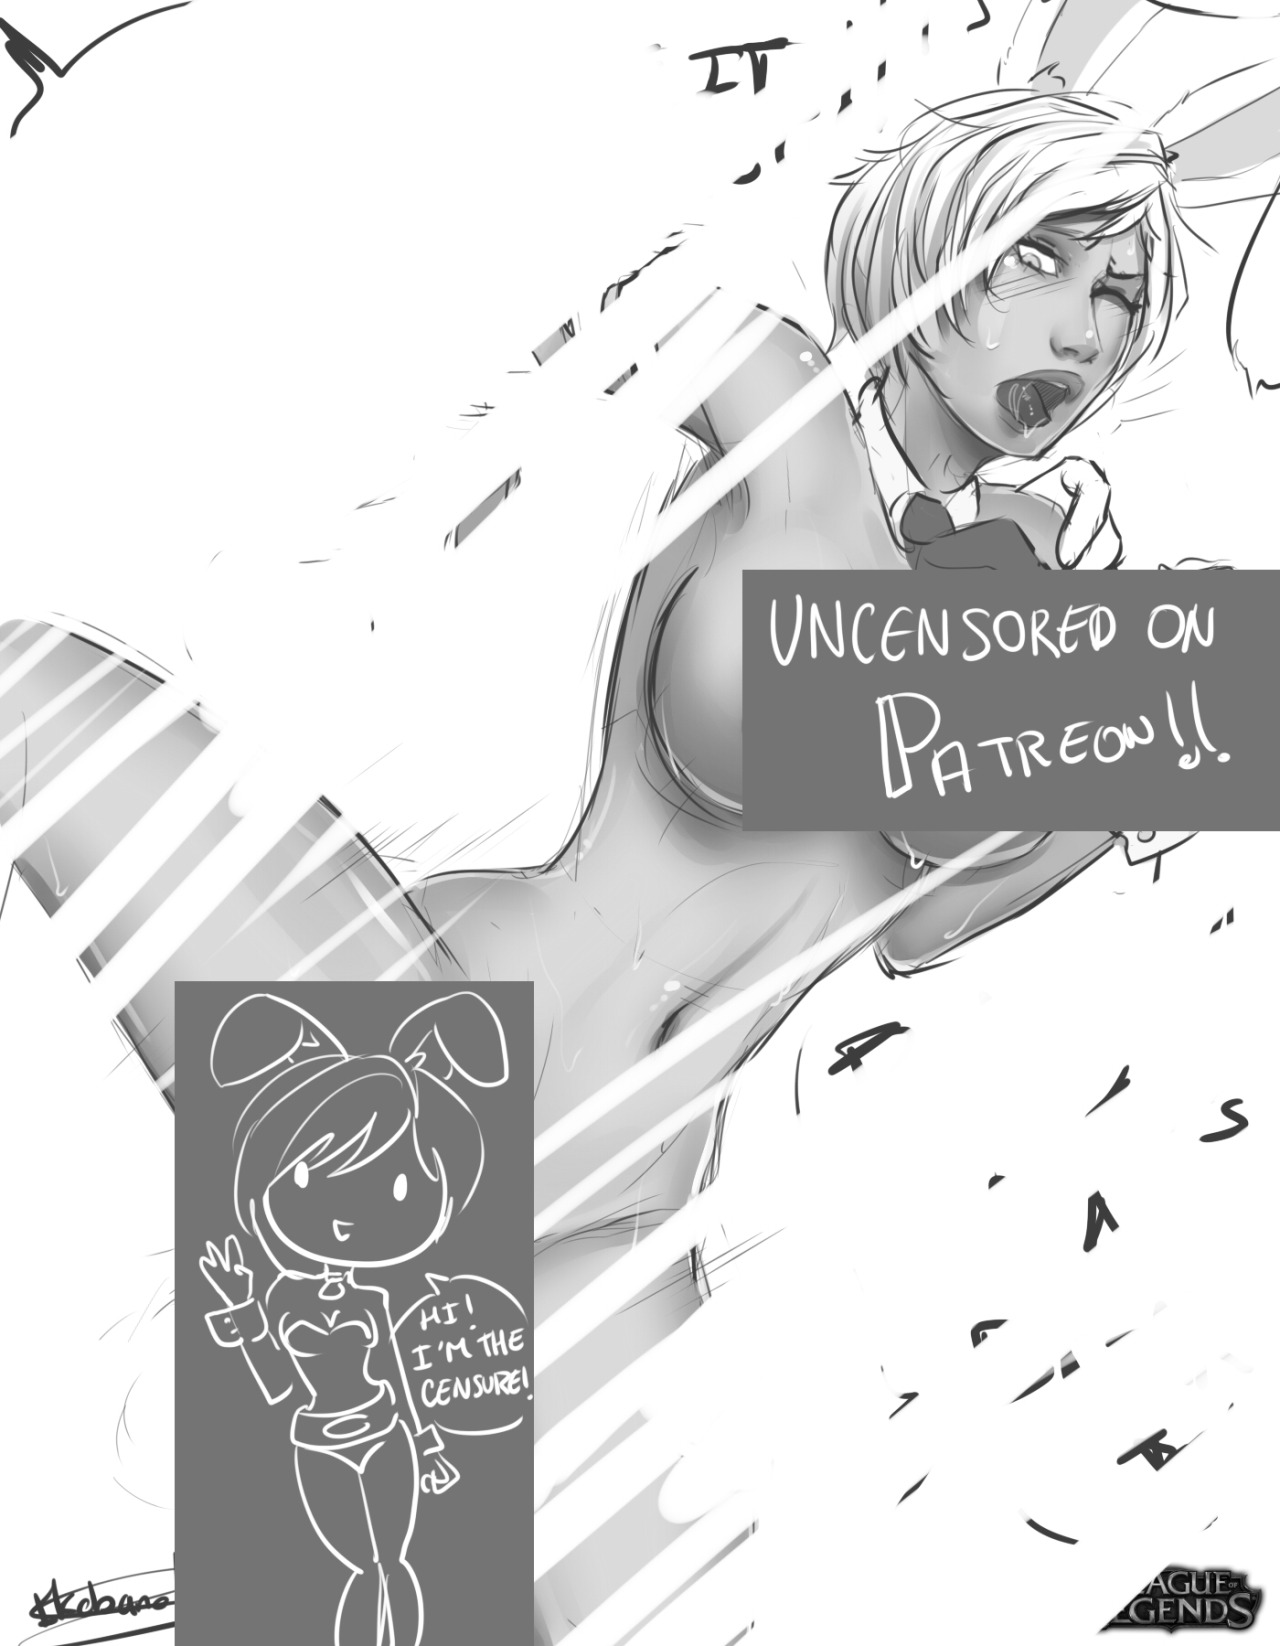 Bunny Riven Uncensored on Patreon! Btw this is the 25th girl!! there is 24 more